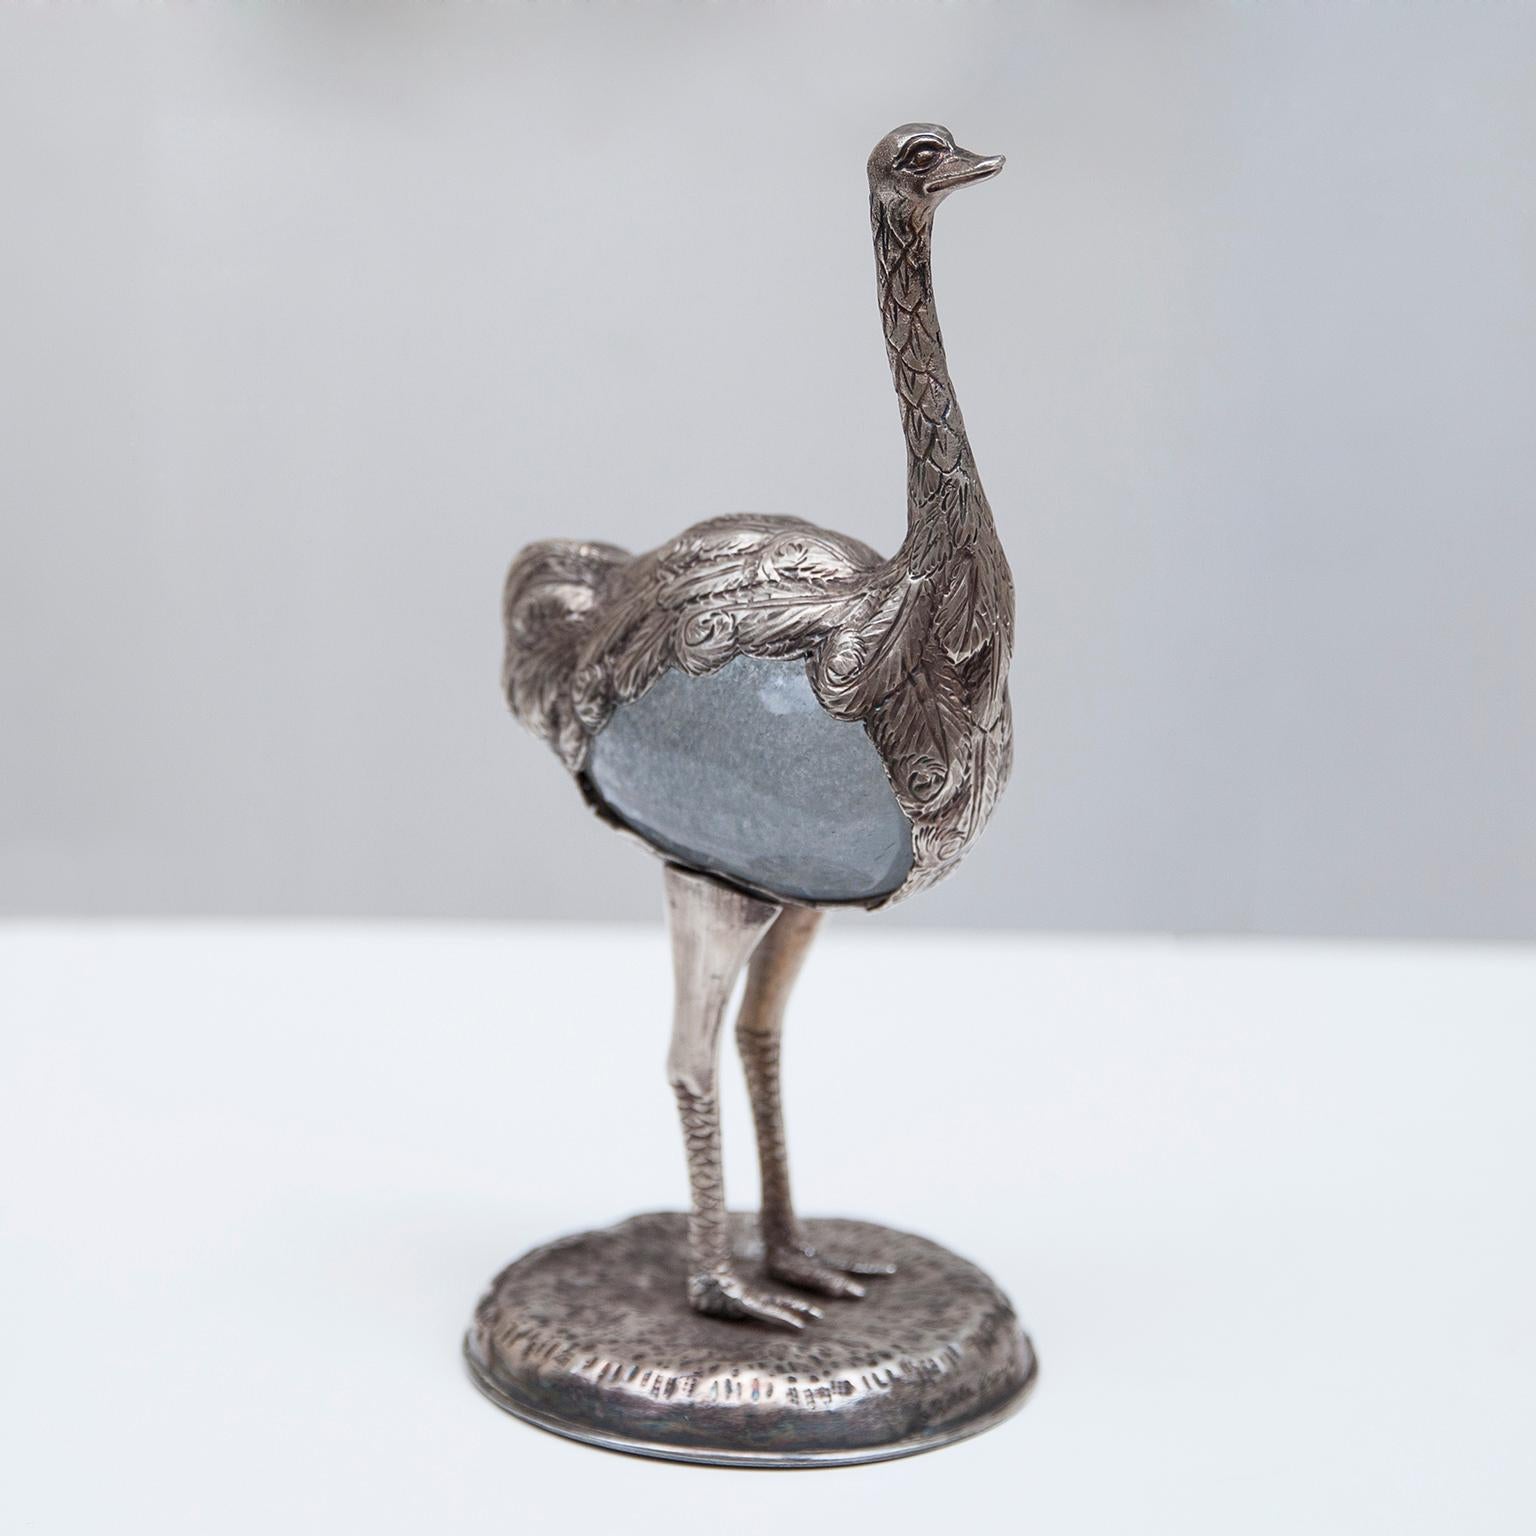 Rare signed Gabriella Crespi ostrich sculpture with a Murano blown glass egg inside, made in Italy, 1970s.
   
  